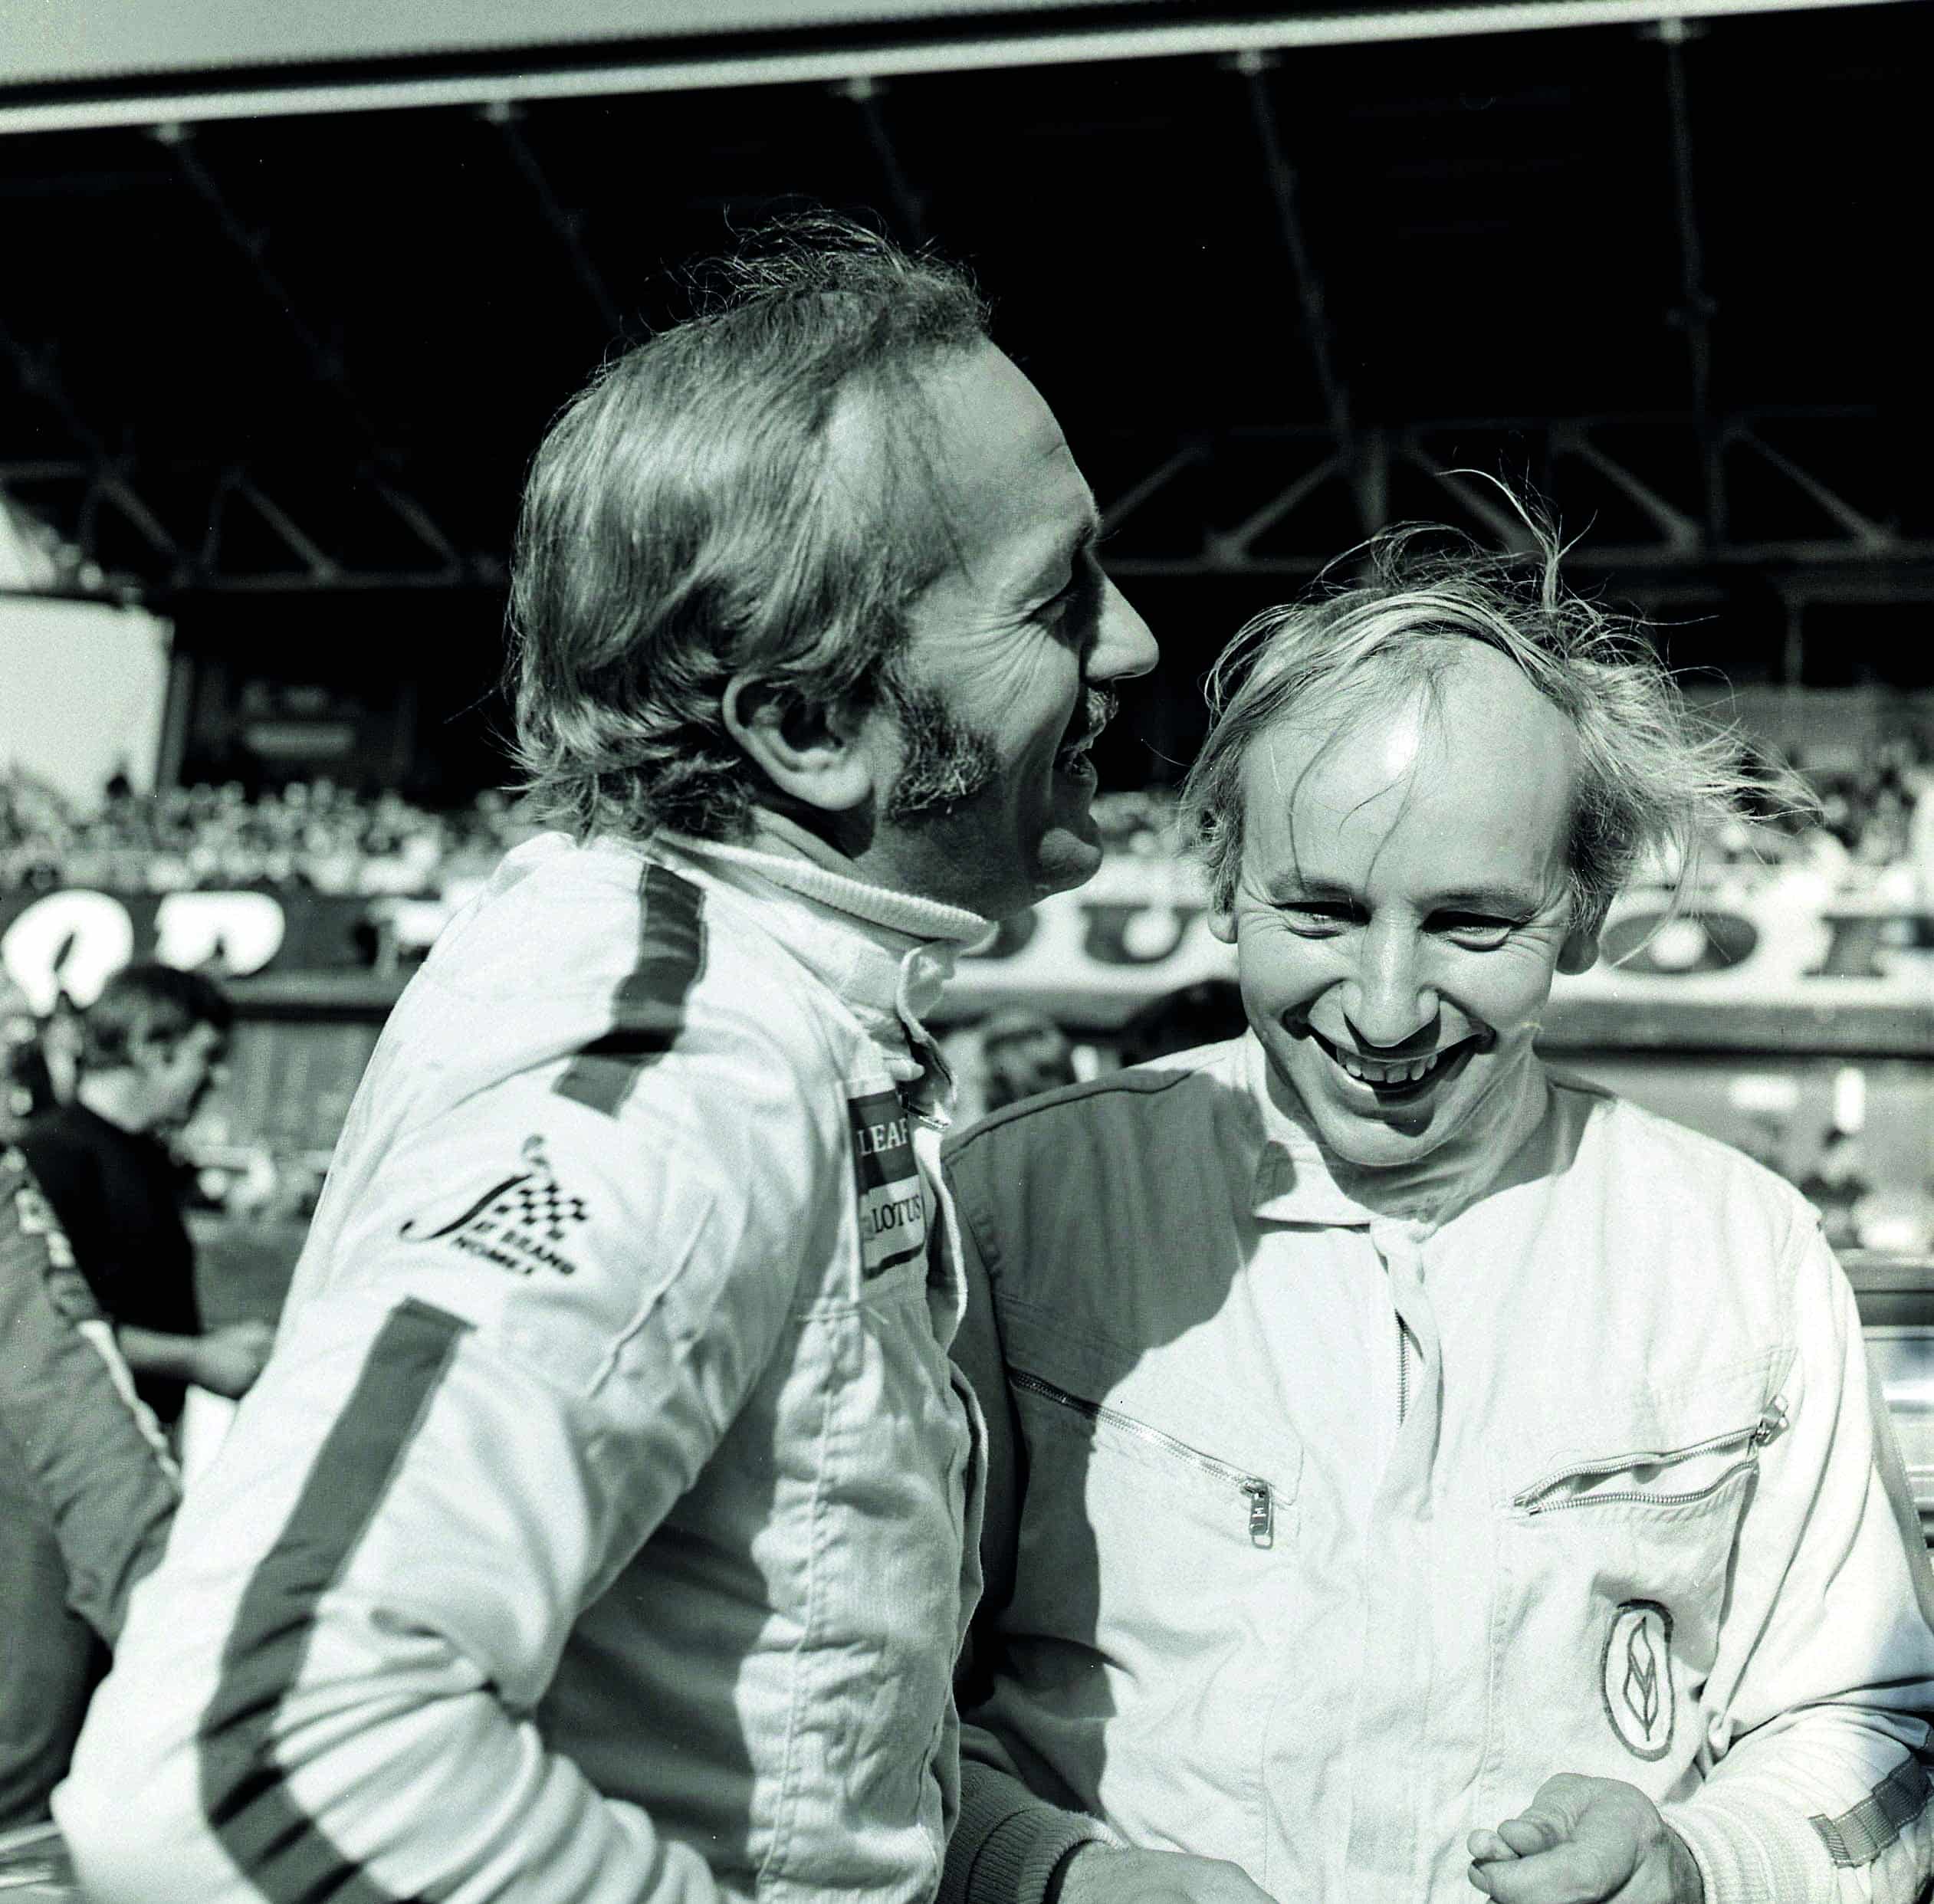 Colin Chapman and John Surtees at Brands Hatch in 1971